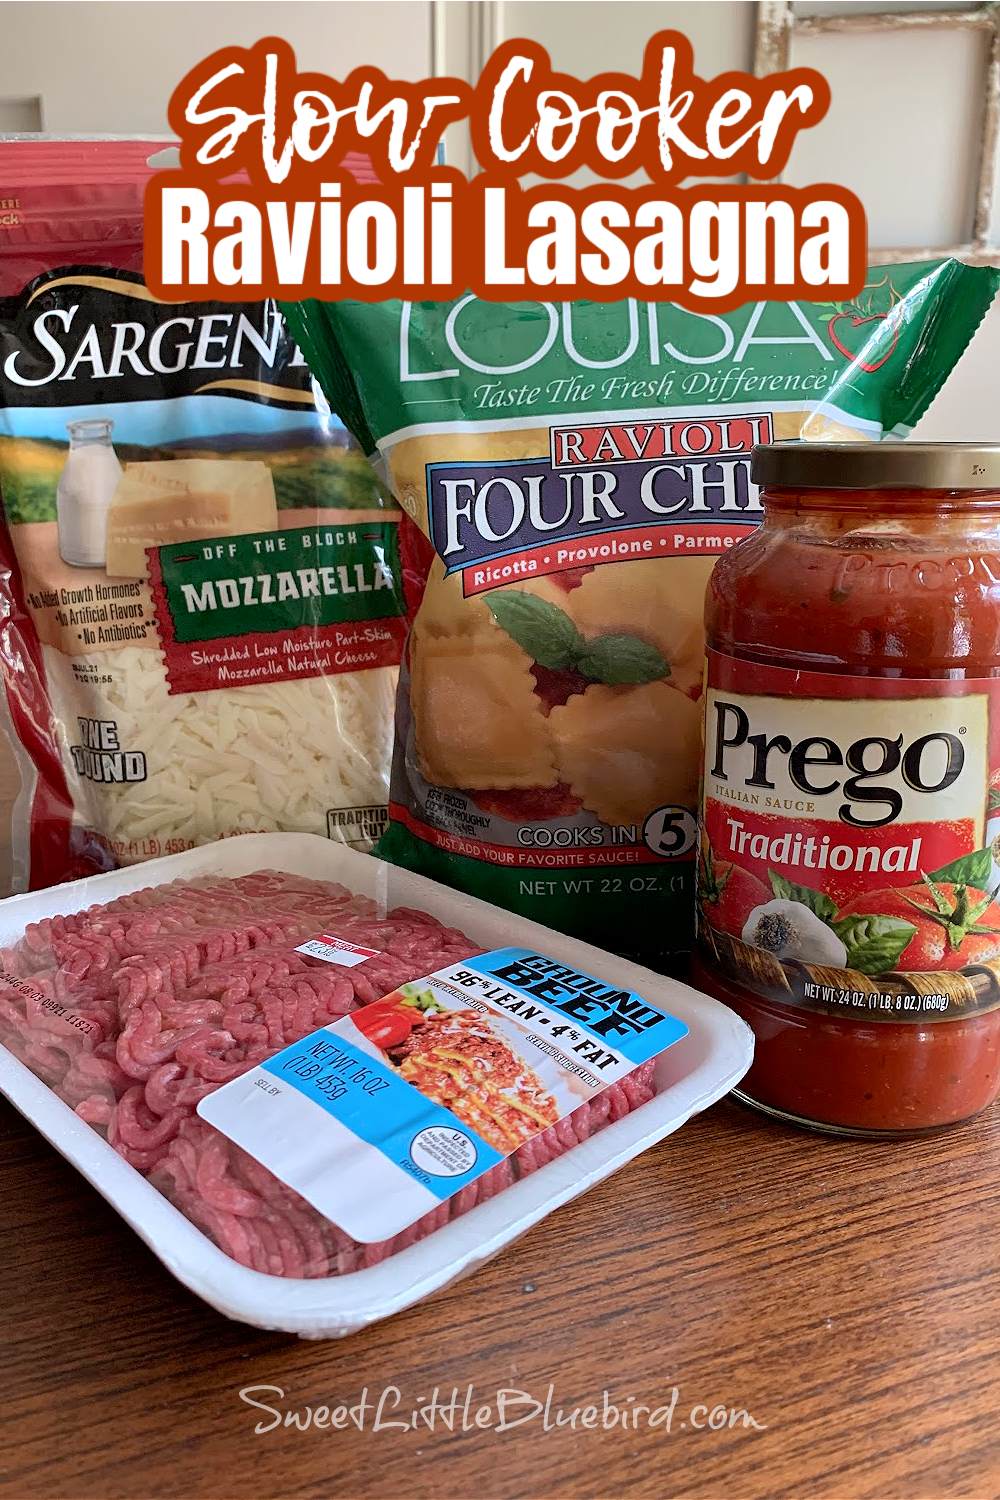 Photo of the ingredients for Slow Cooker Ravioli Lasagna 